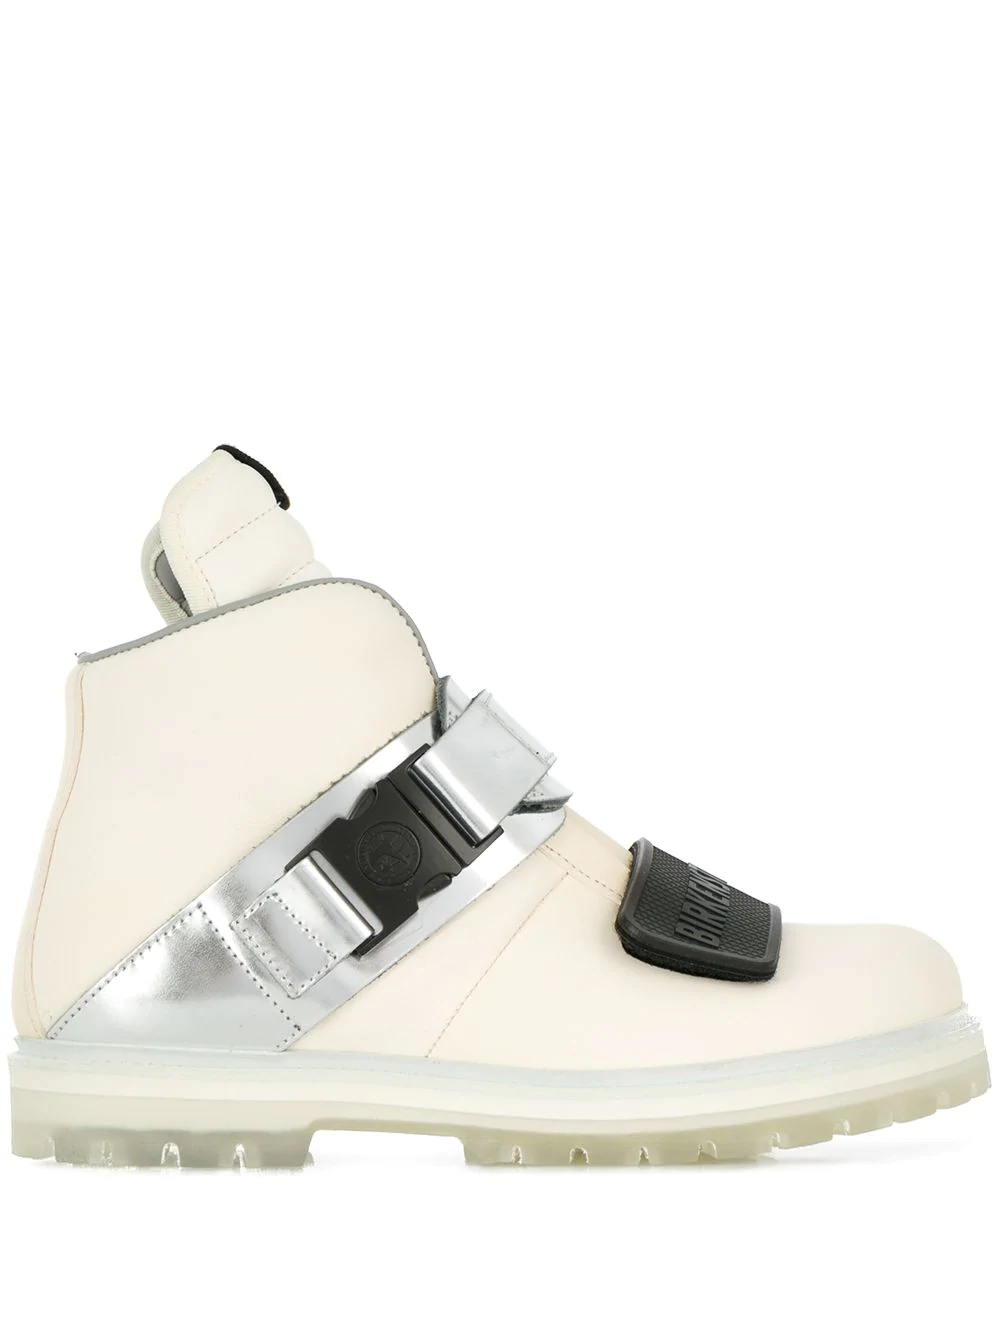 Rick Owens Buckled Snow Style Boots - White | ModeSens